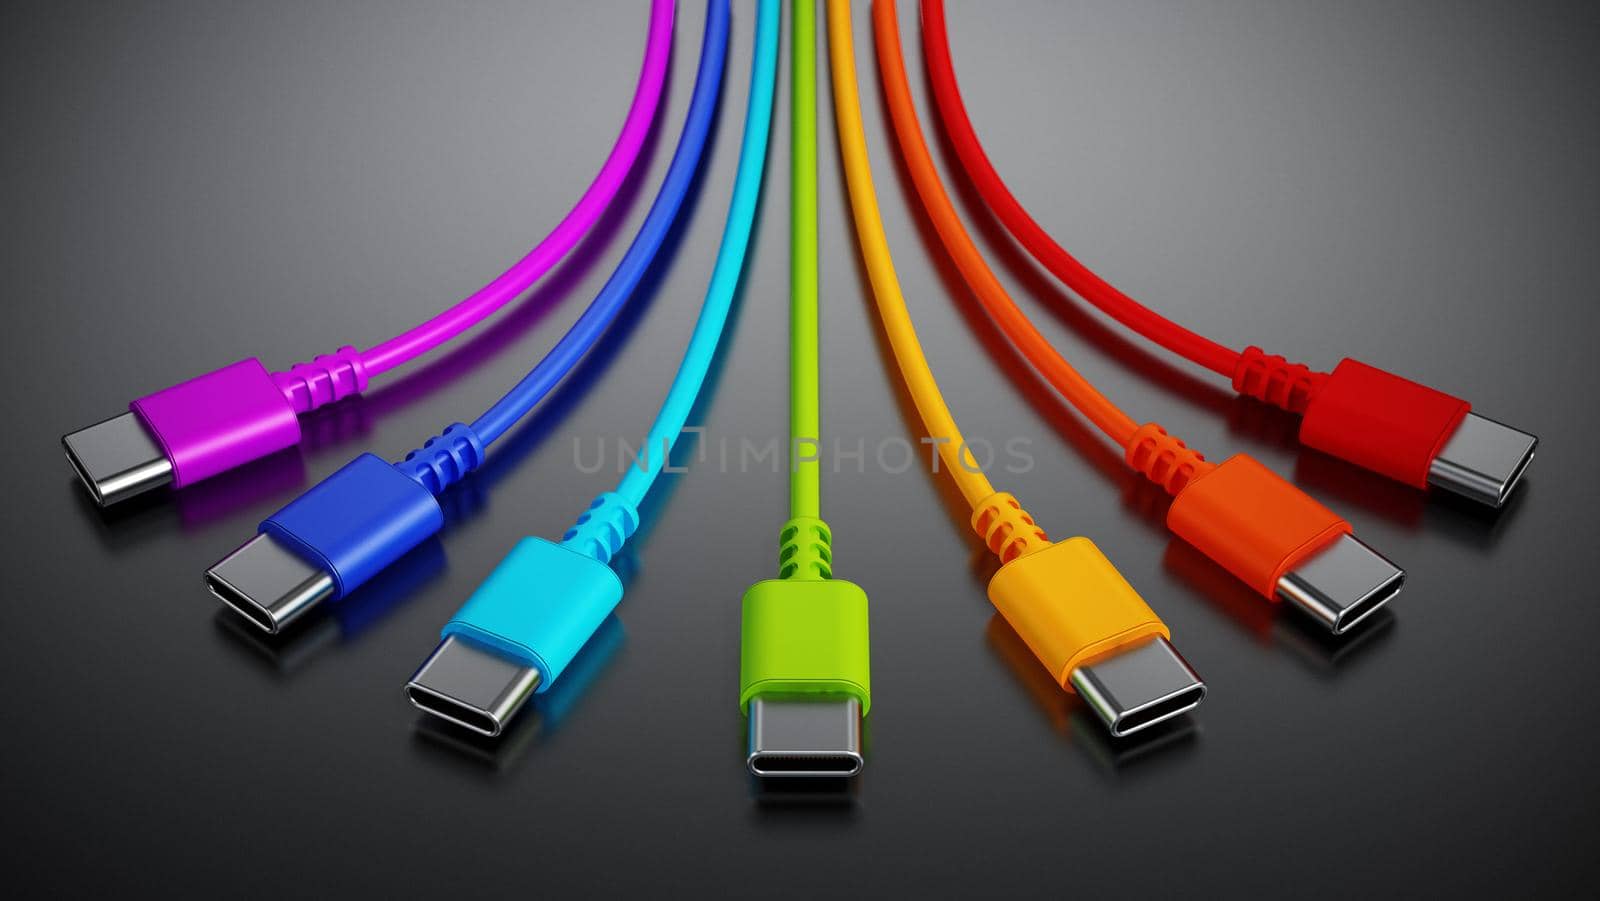 Colorful type C usb cables on dark background. 3D illustration.